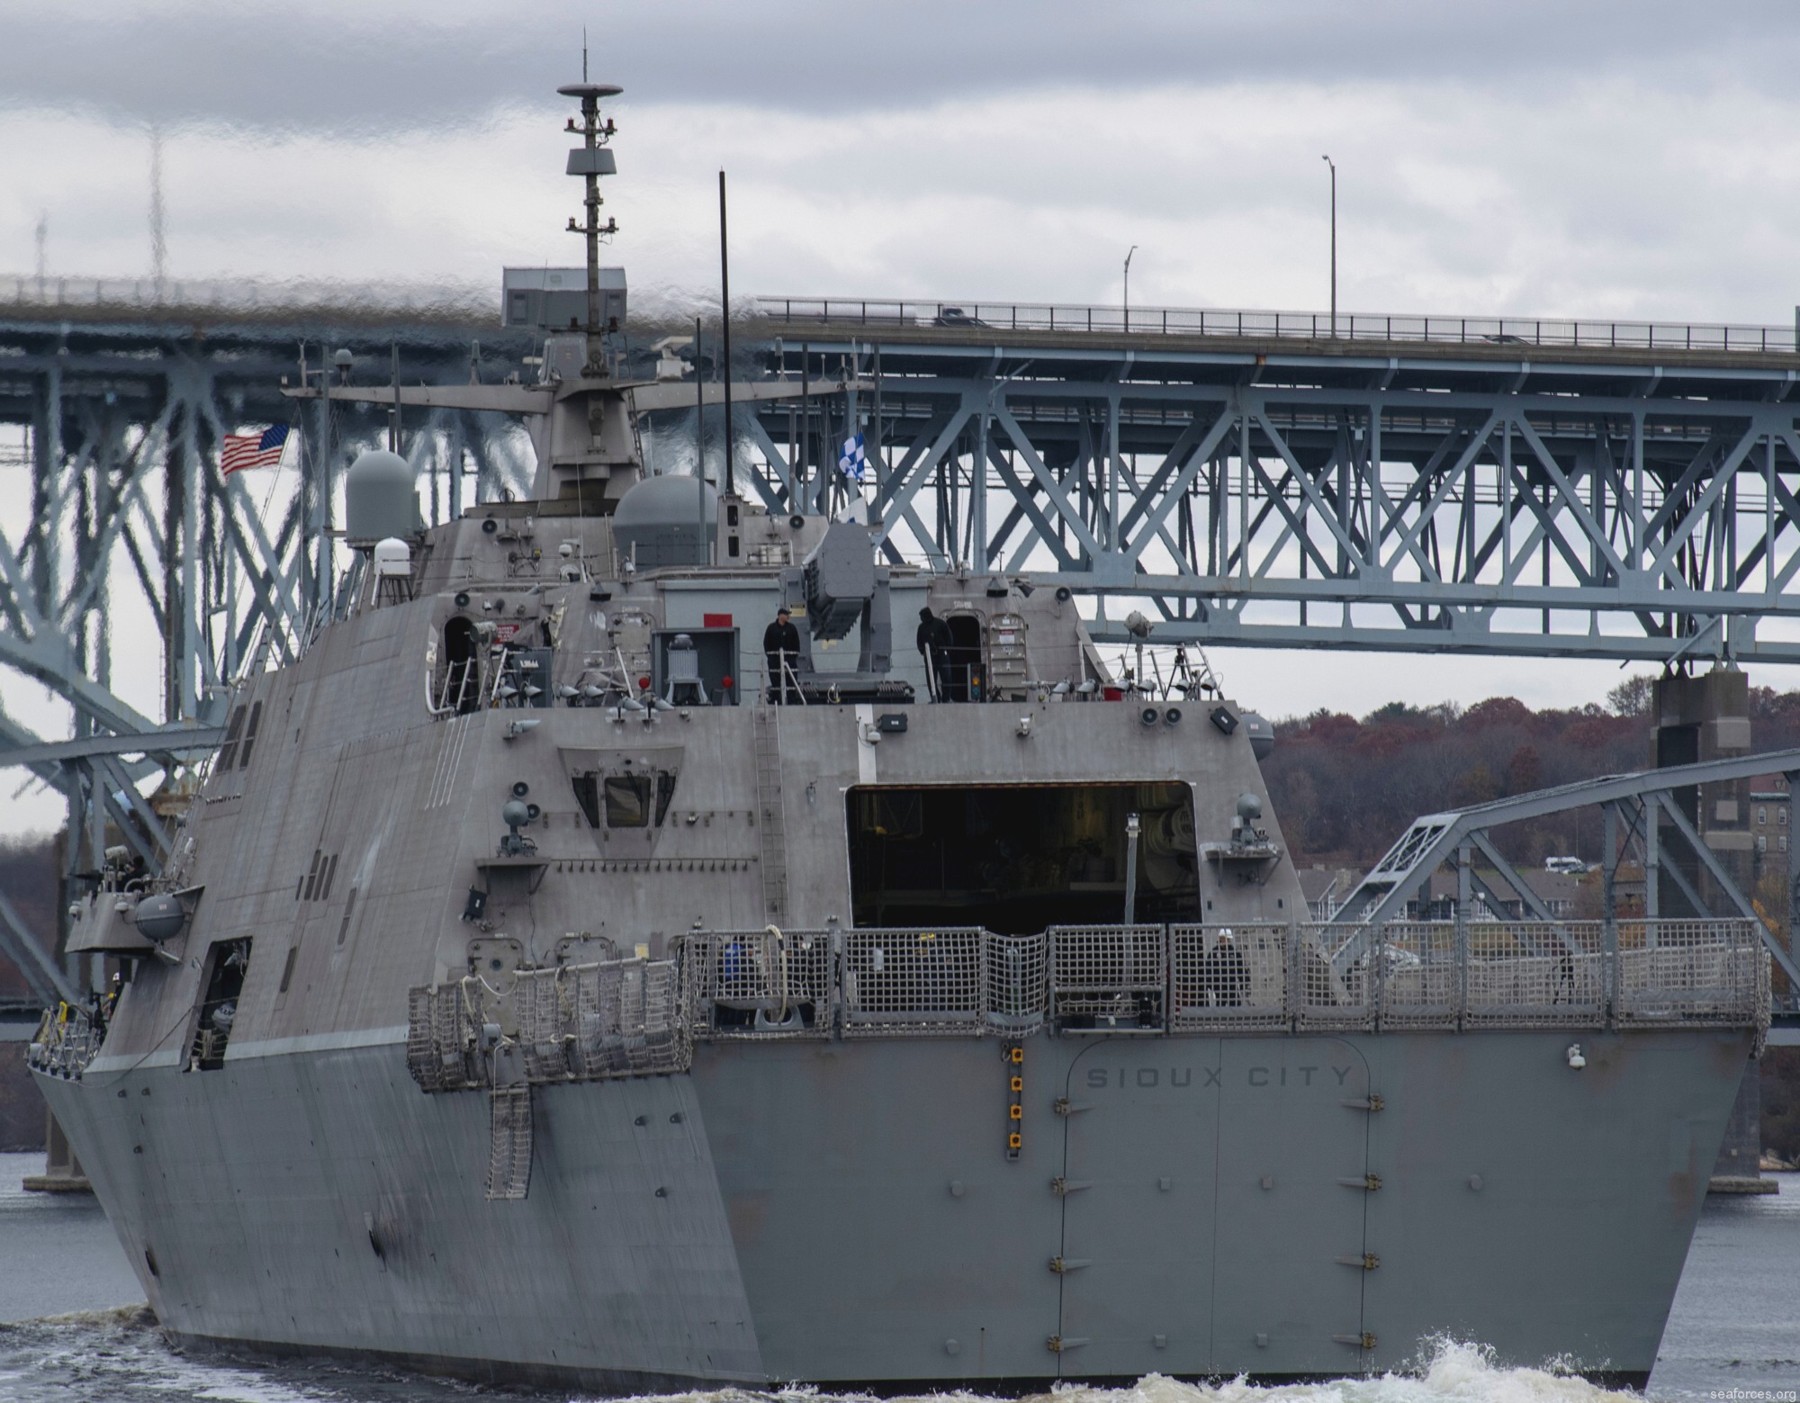 lcs-11 uss sioux city freedom class littoral combat ship 05 groton connecticut